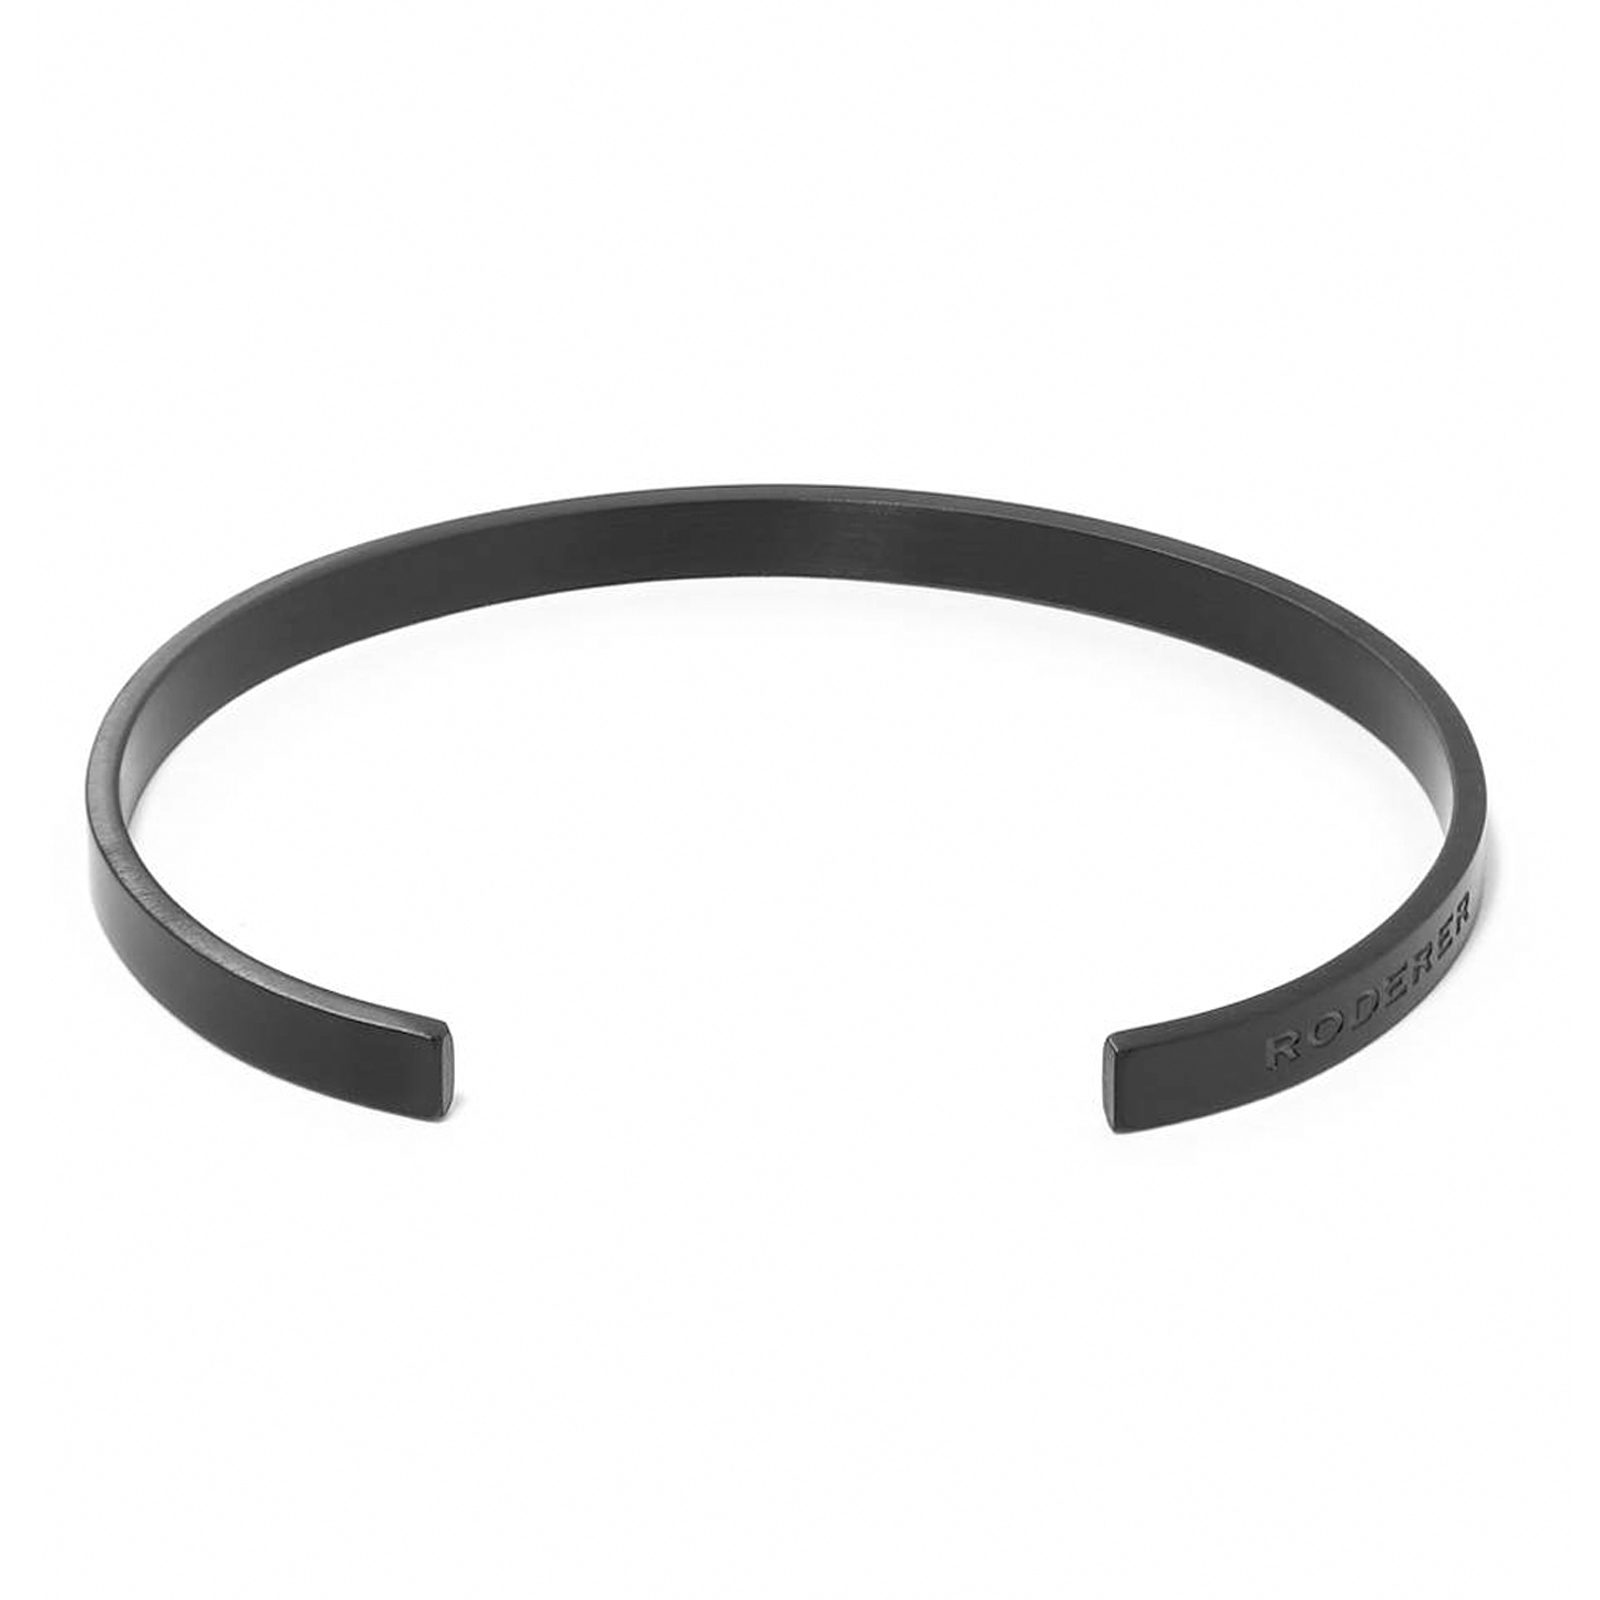 Discover The New Lorenzo Bracelet - Stainless Steel